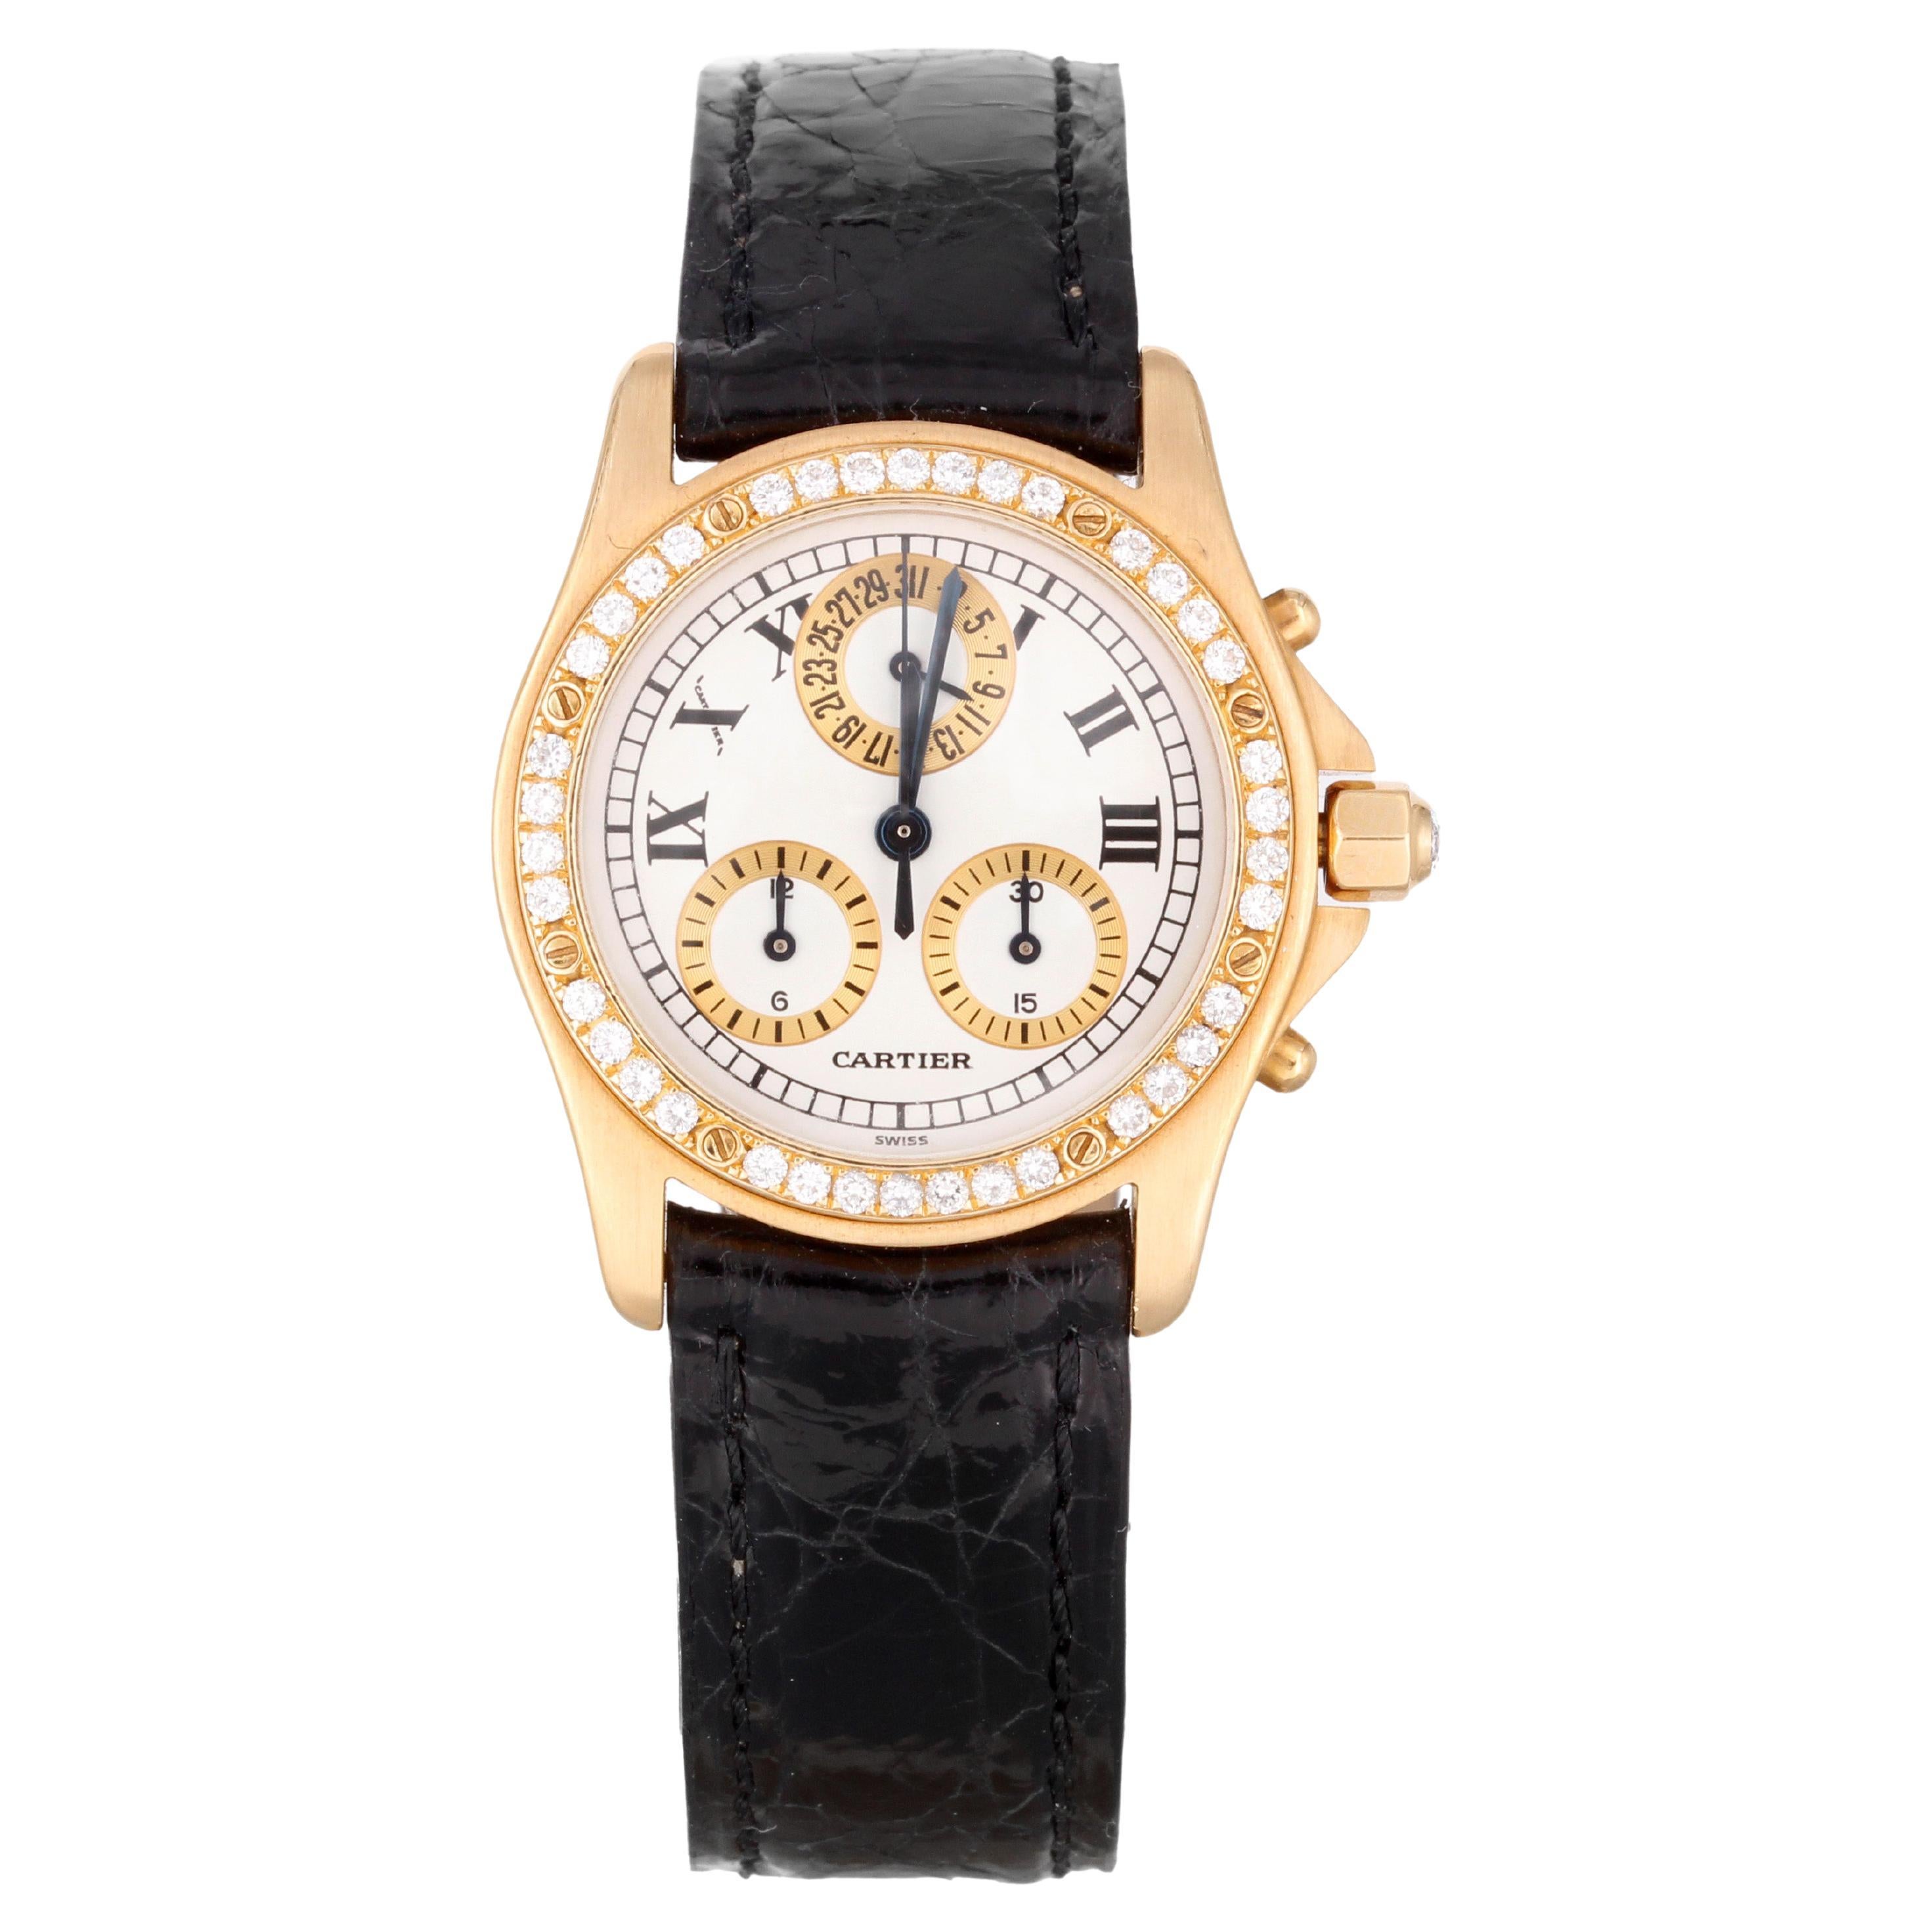 Cartier Santos Ronde Chronograph Yellow Gold Ladies Watch Ref.: 1530 For Sale